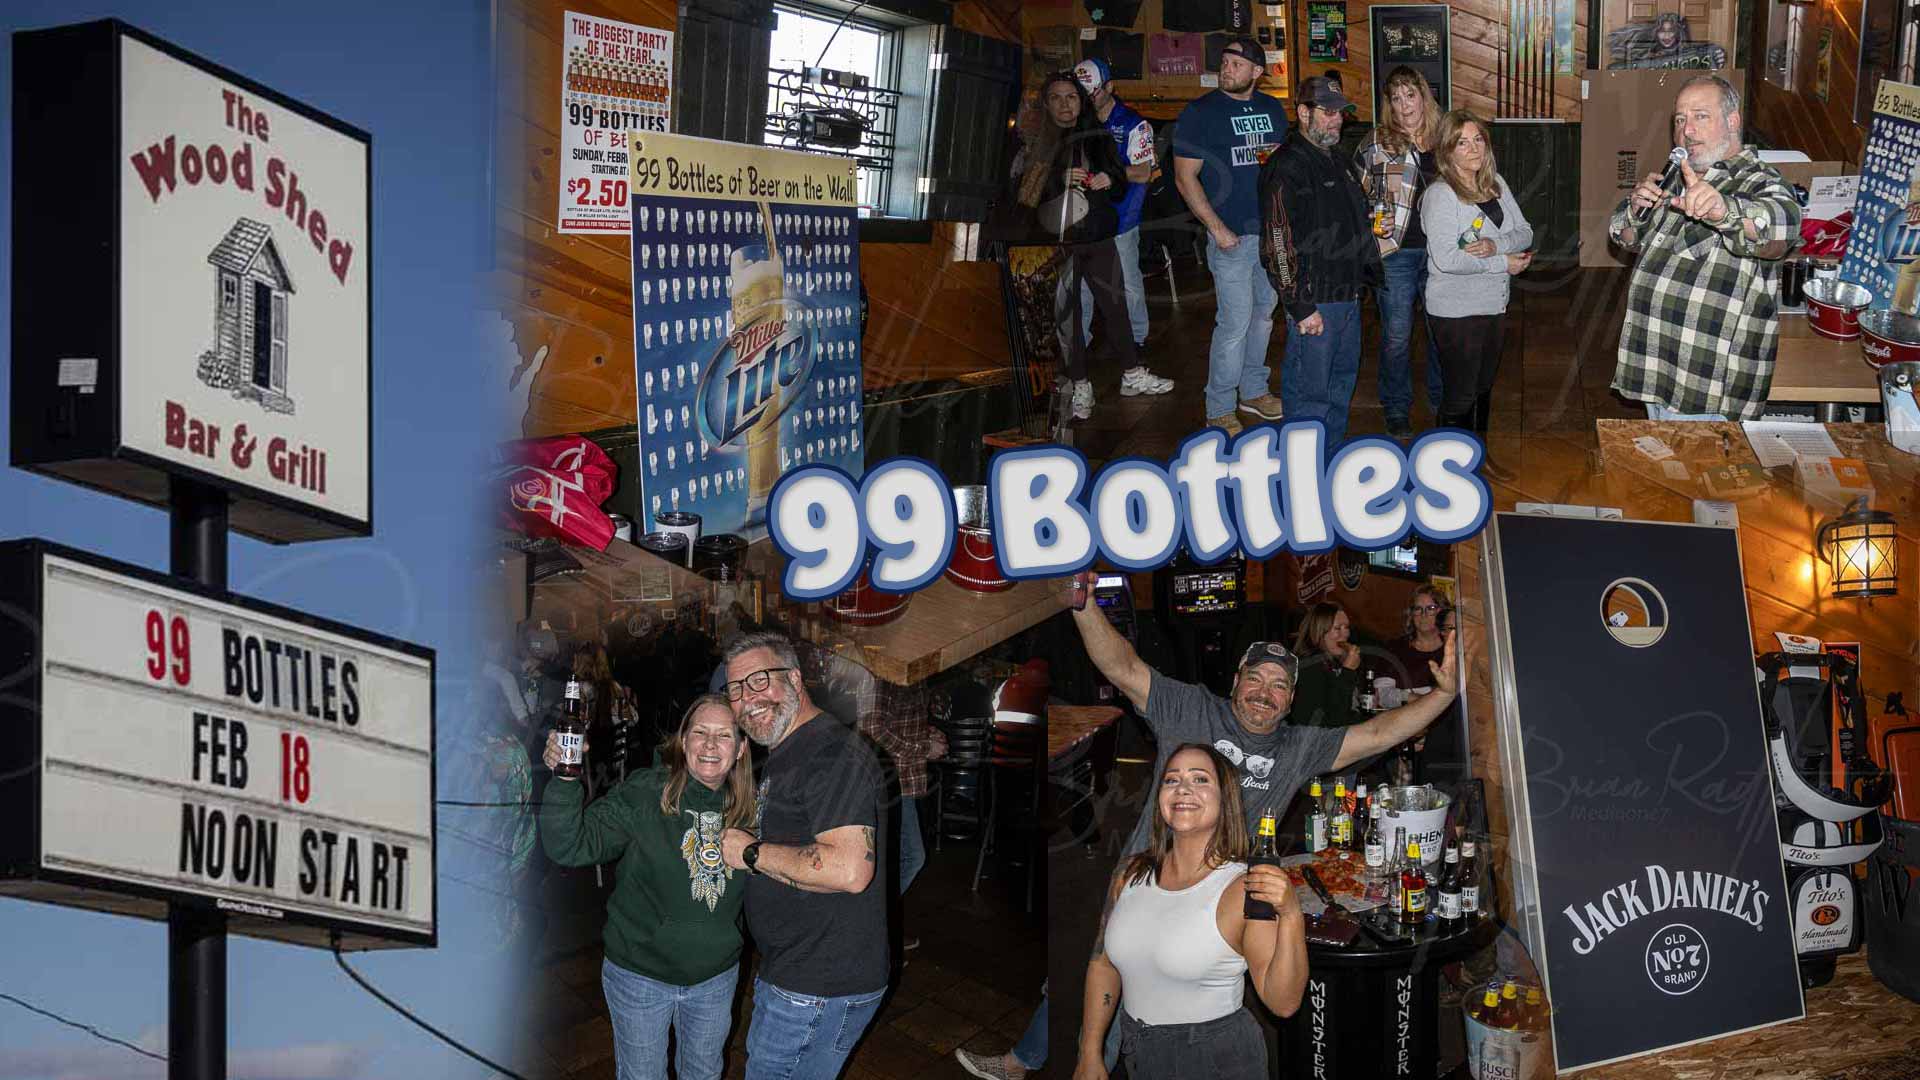 Woodshed Bar and Grill 99 Bottles Party during Indy 500